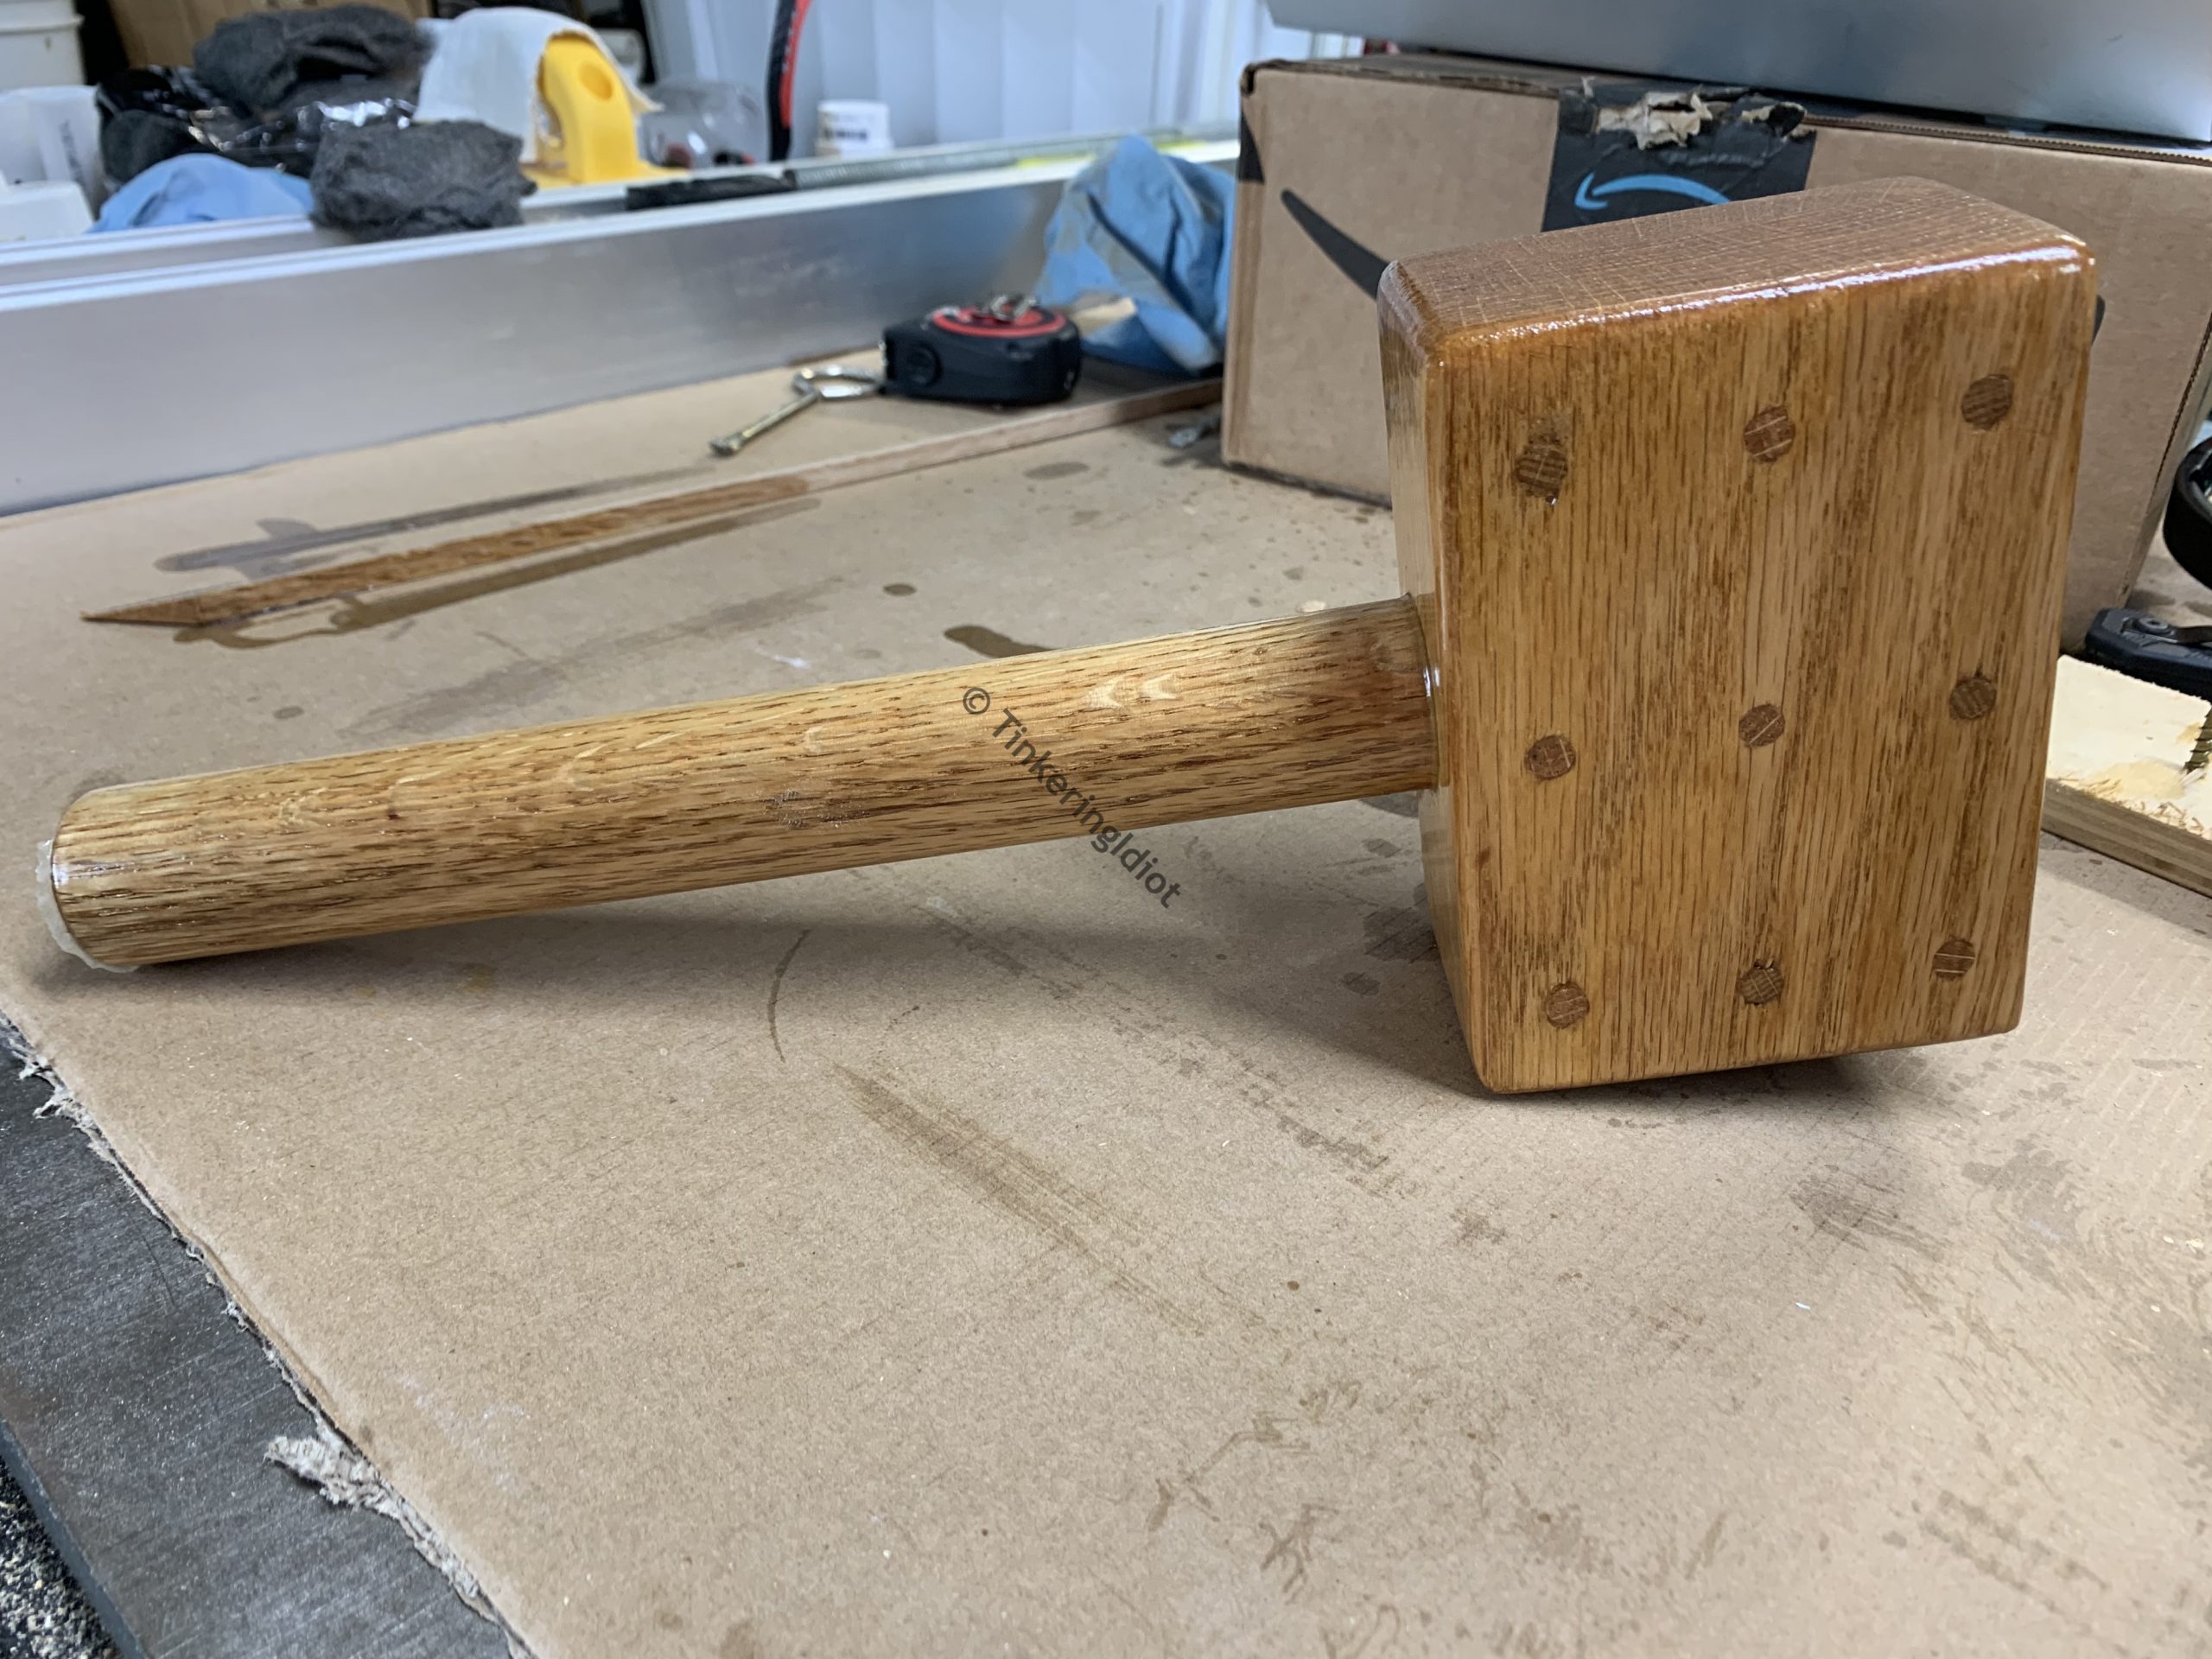 The Wooden Mallet - A Rite of Passage - Tinkering Idiot